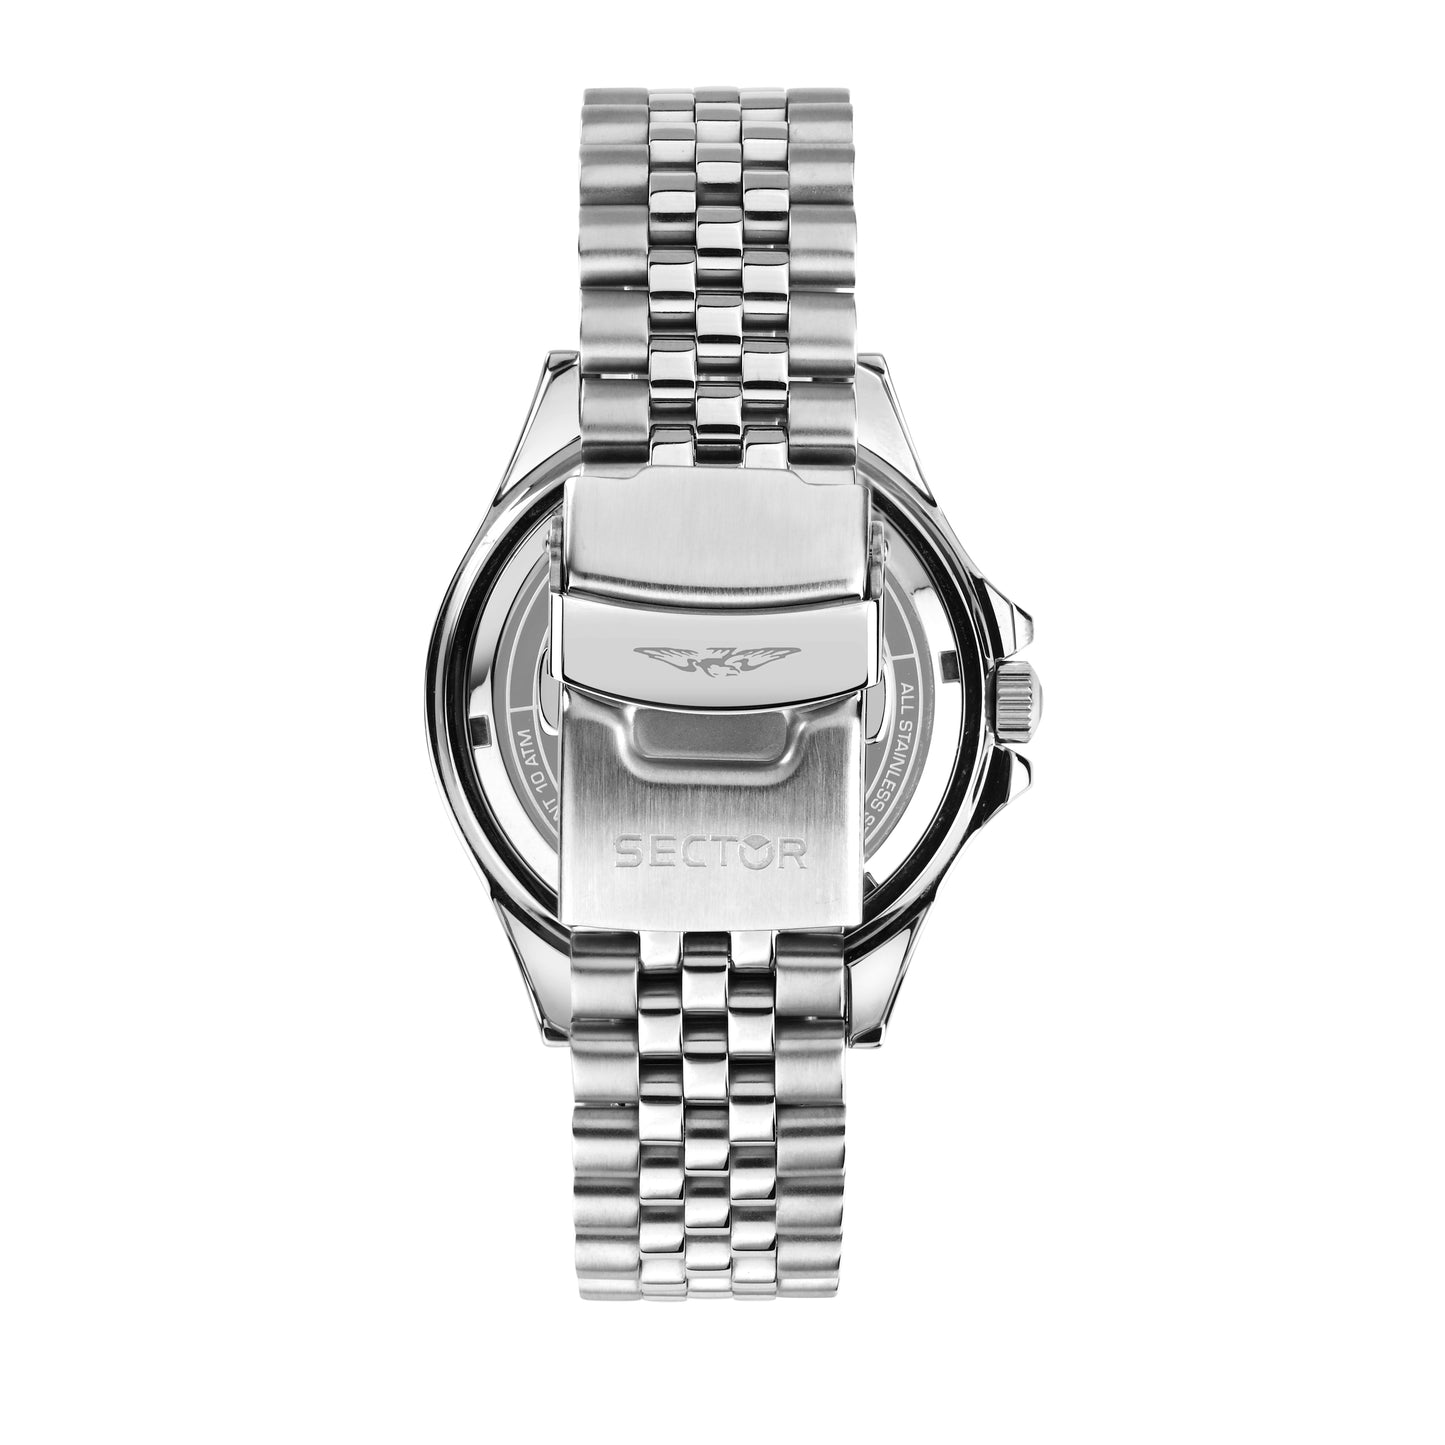 MONTRE HOMME SECTOR 230 R3253161052